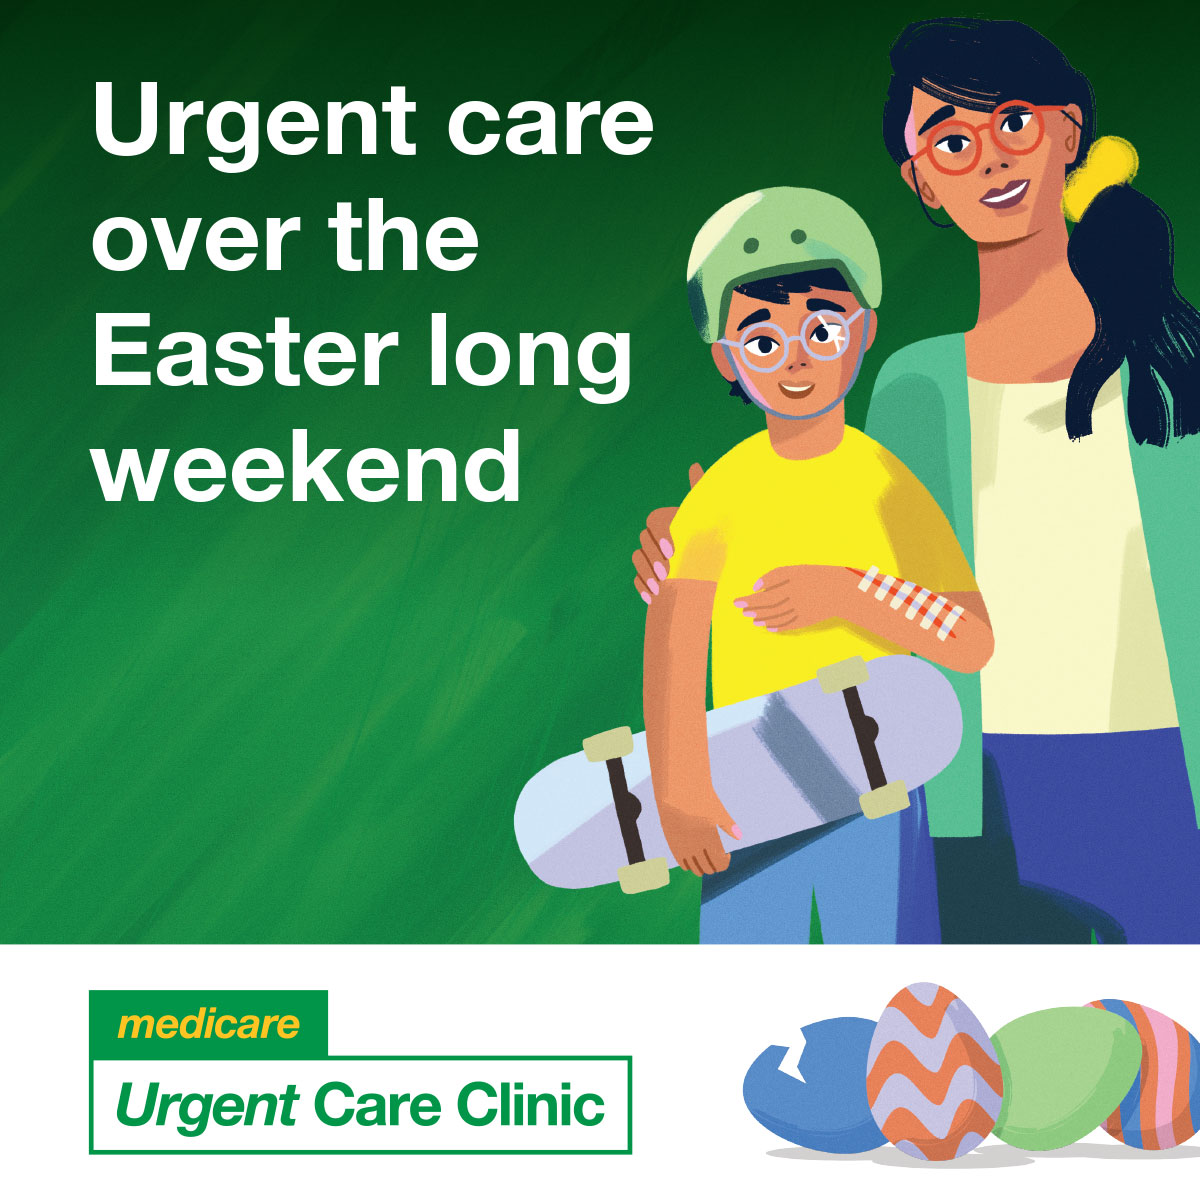 While holidays are a time to relax, it’s often a different story for emergency departments. If you need urgent care for non-life-threatening injuries and illnesses this Easter, contact your local Priority Primary Care Centre or Medicare Urgent Care Clinic: murrayphn.org.au/save-the-ed-fo…